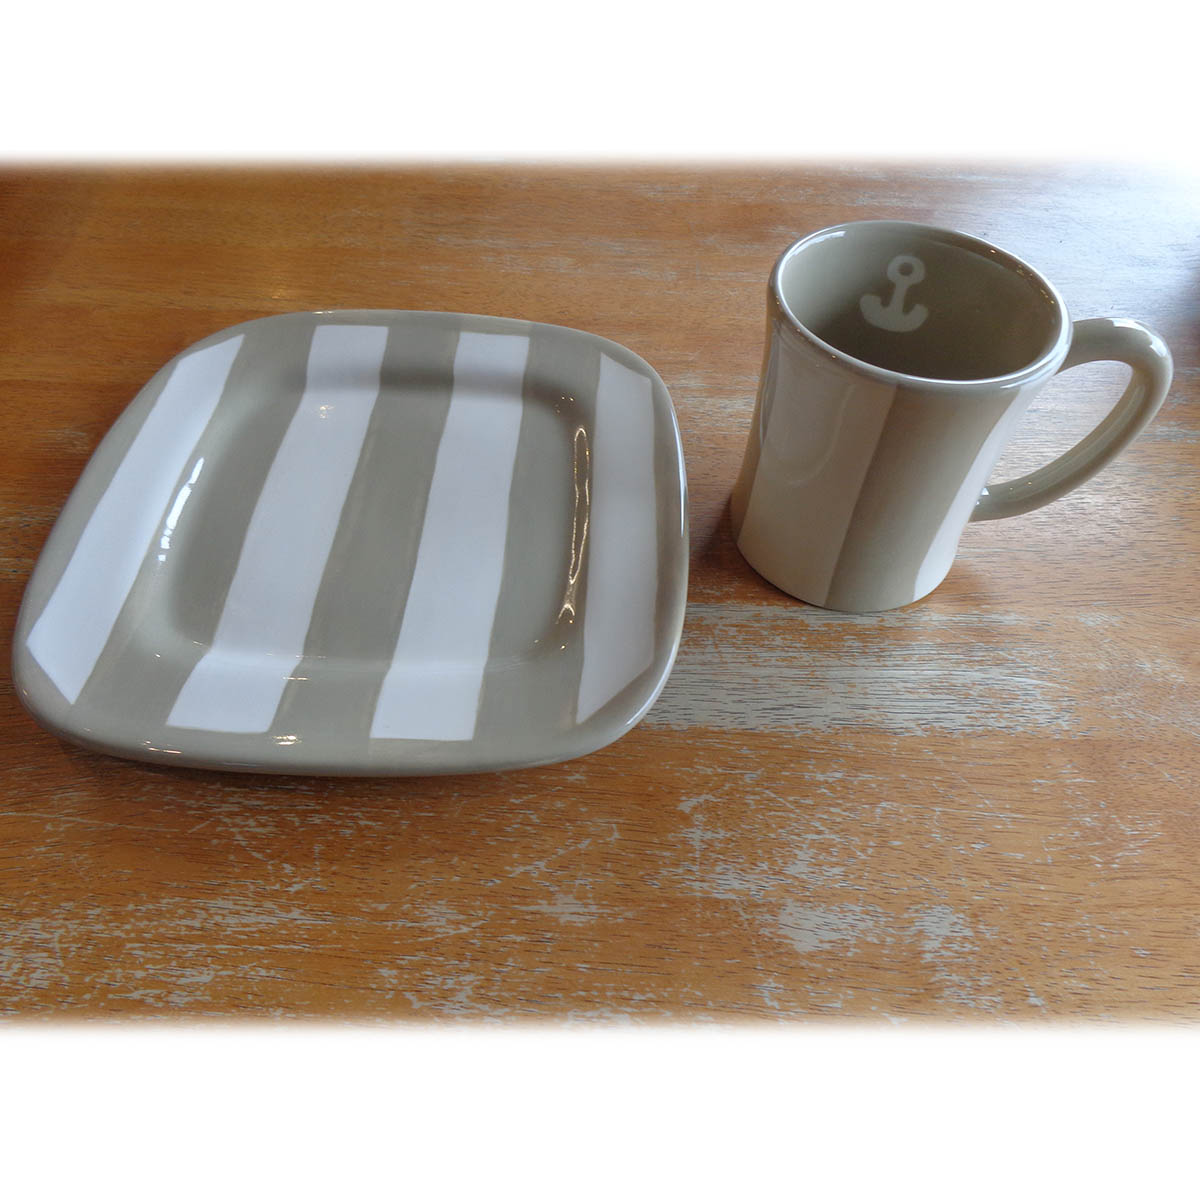 Adult male square plate and large mug